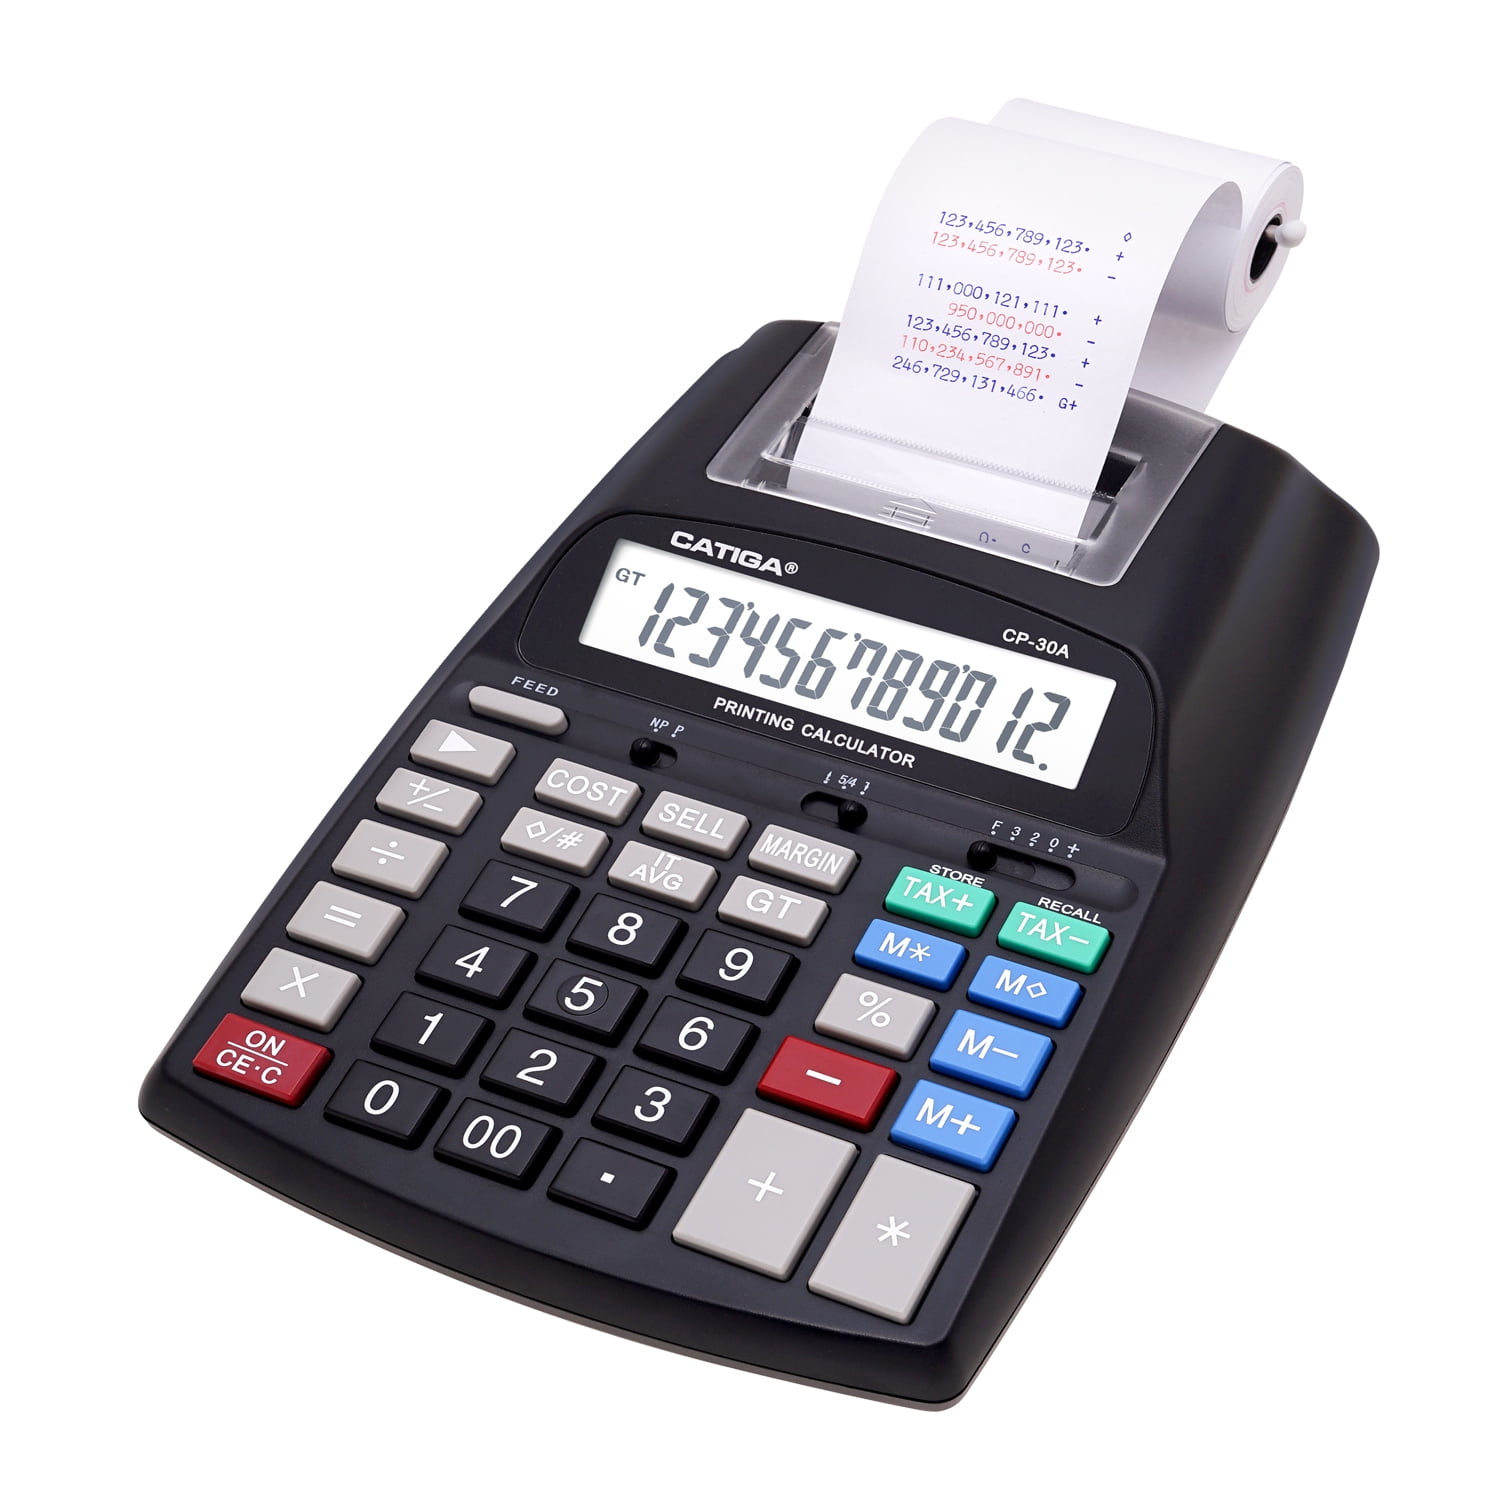 Canon MP11DX Printing Calculator for sale online 